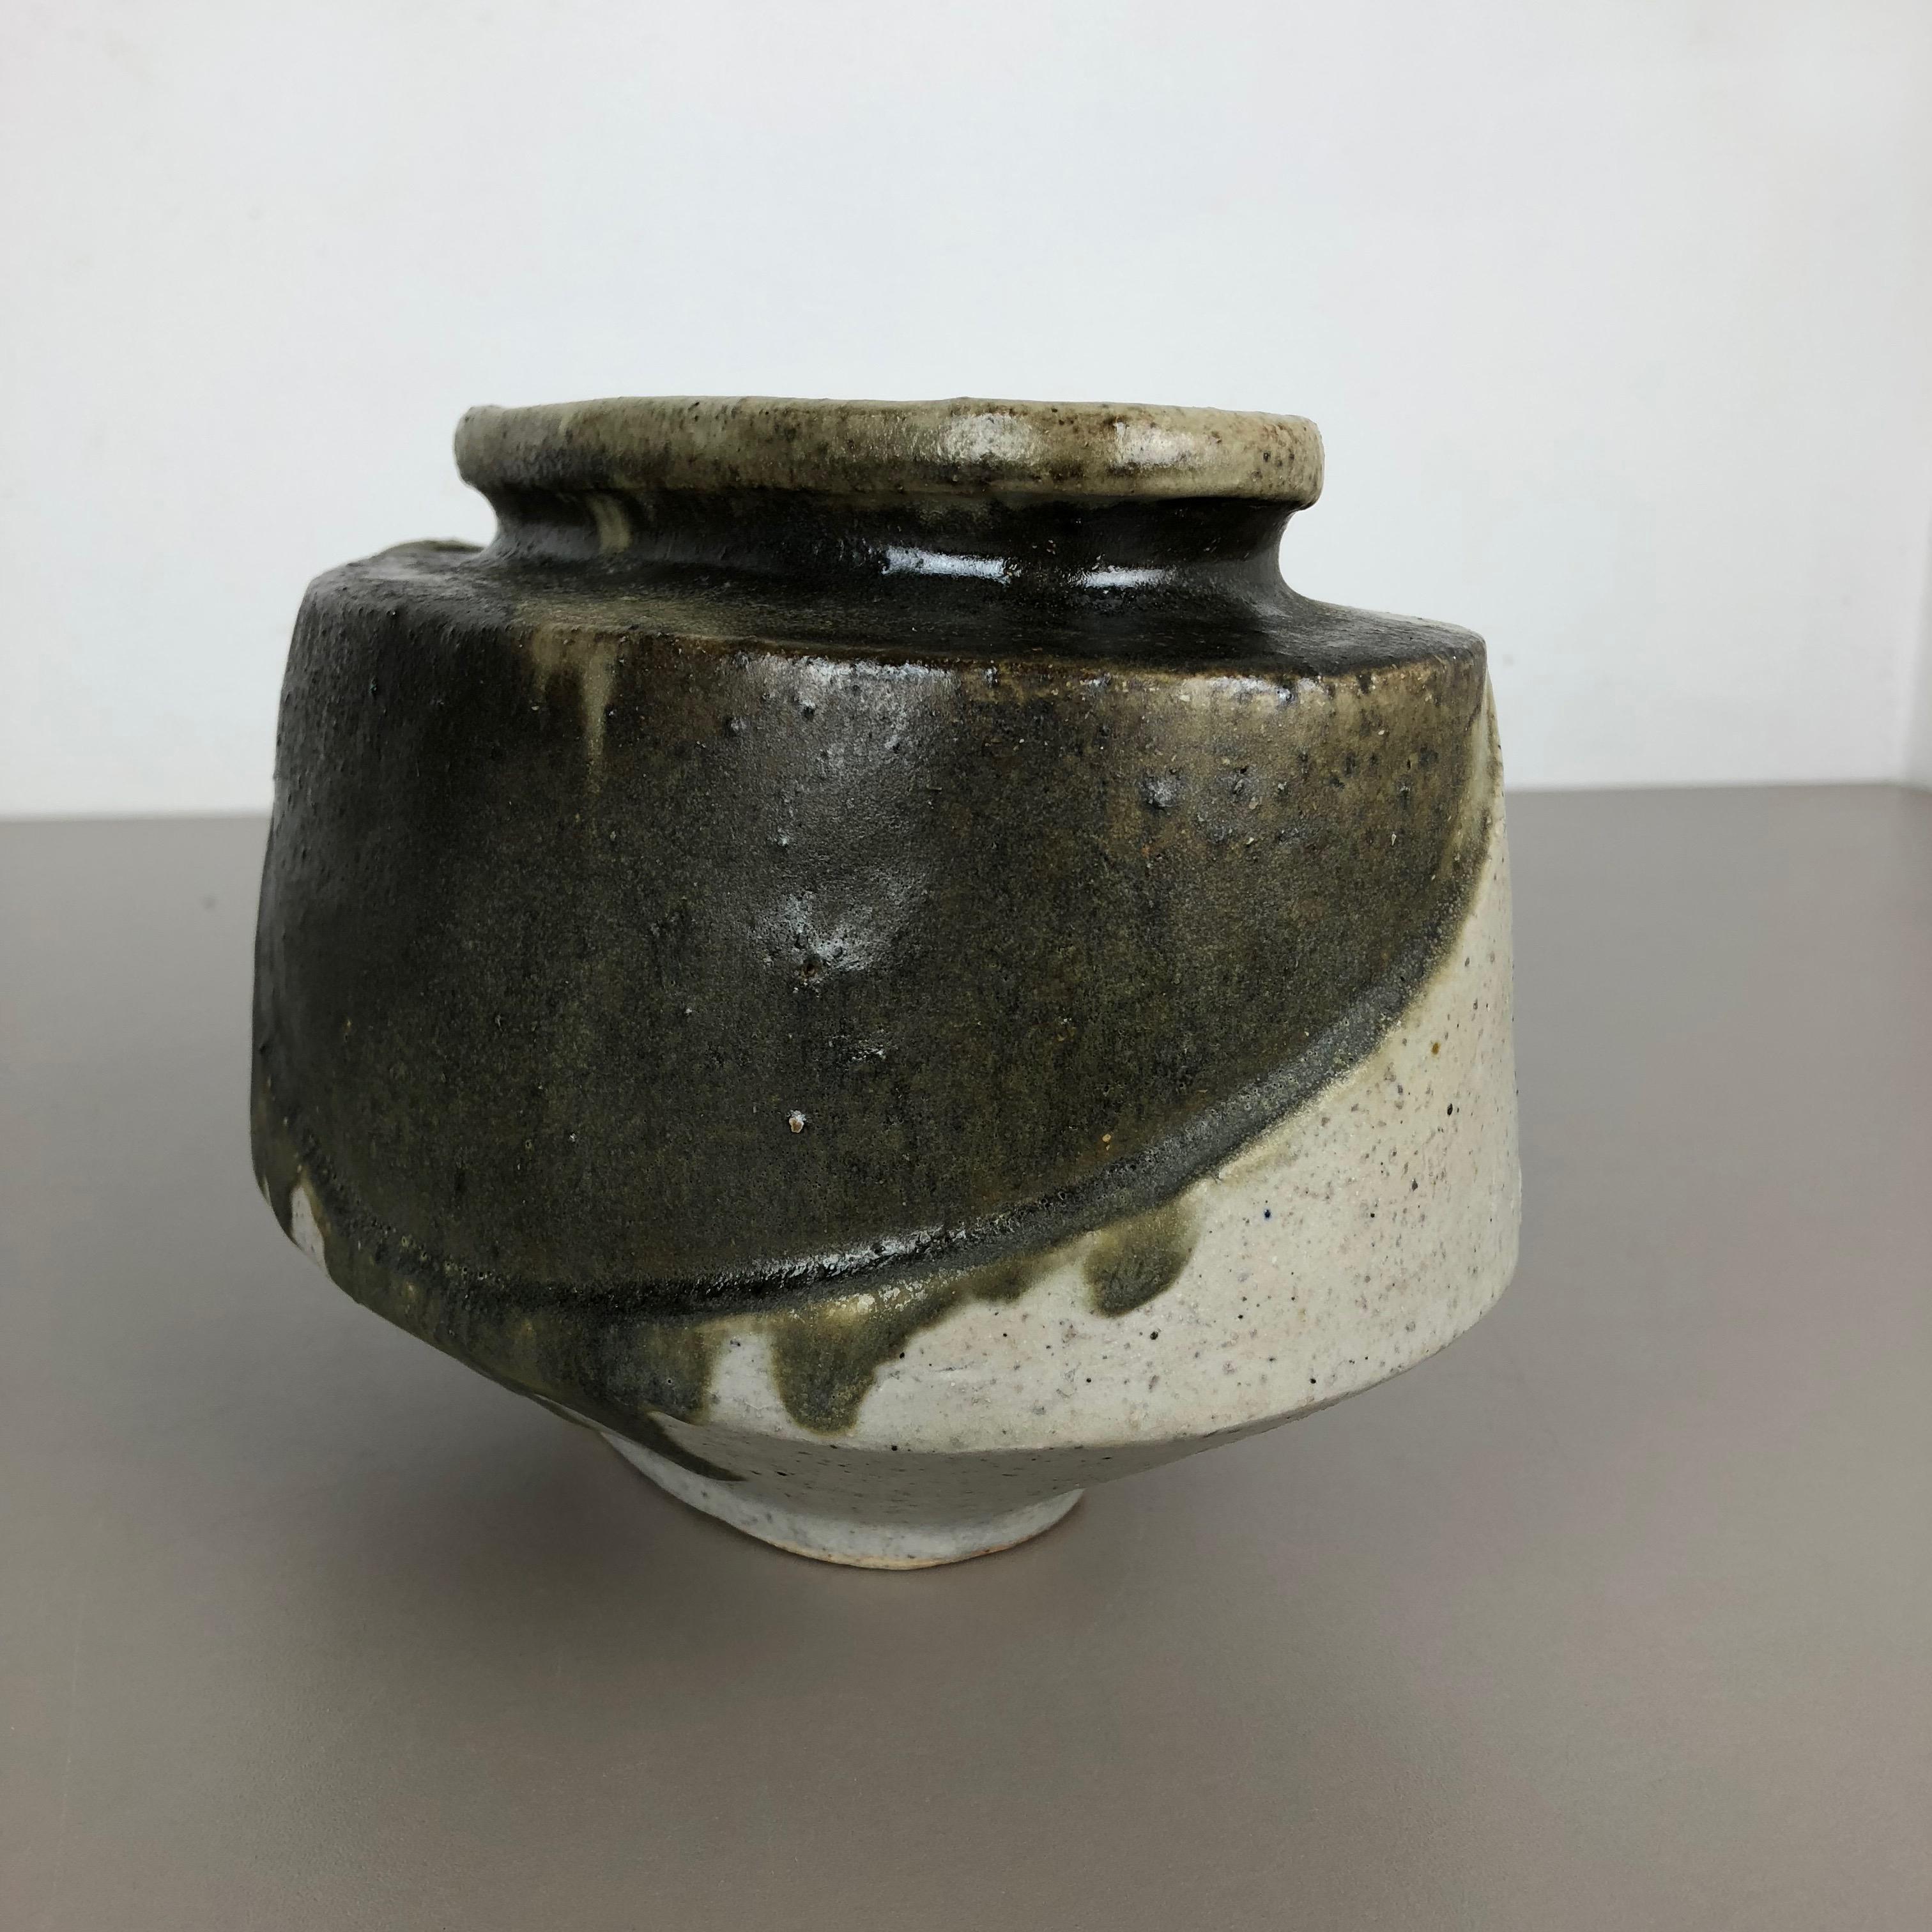 Ceramic Studio Pottery Object Vase by Bruno and Ingeborg Asshoff, Germany, 1960s For Sale 2